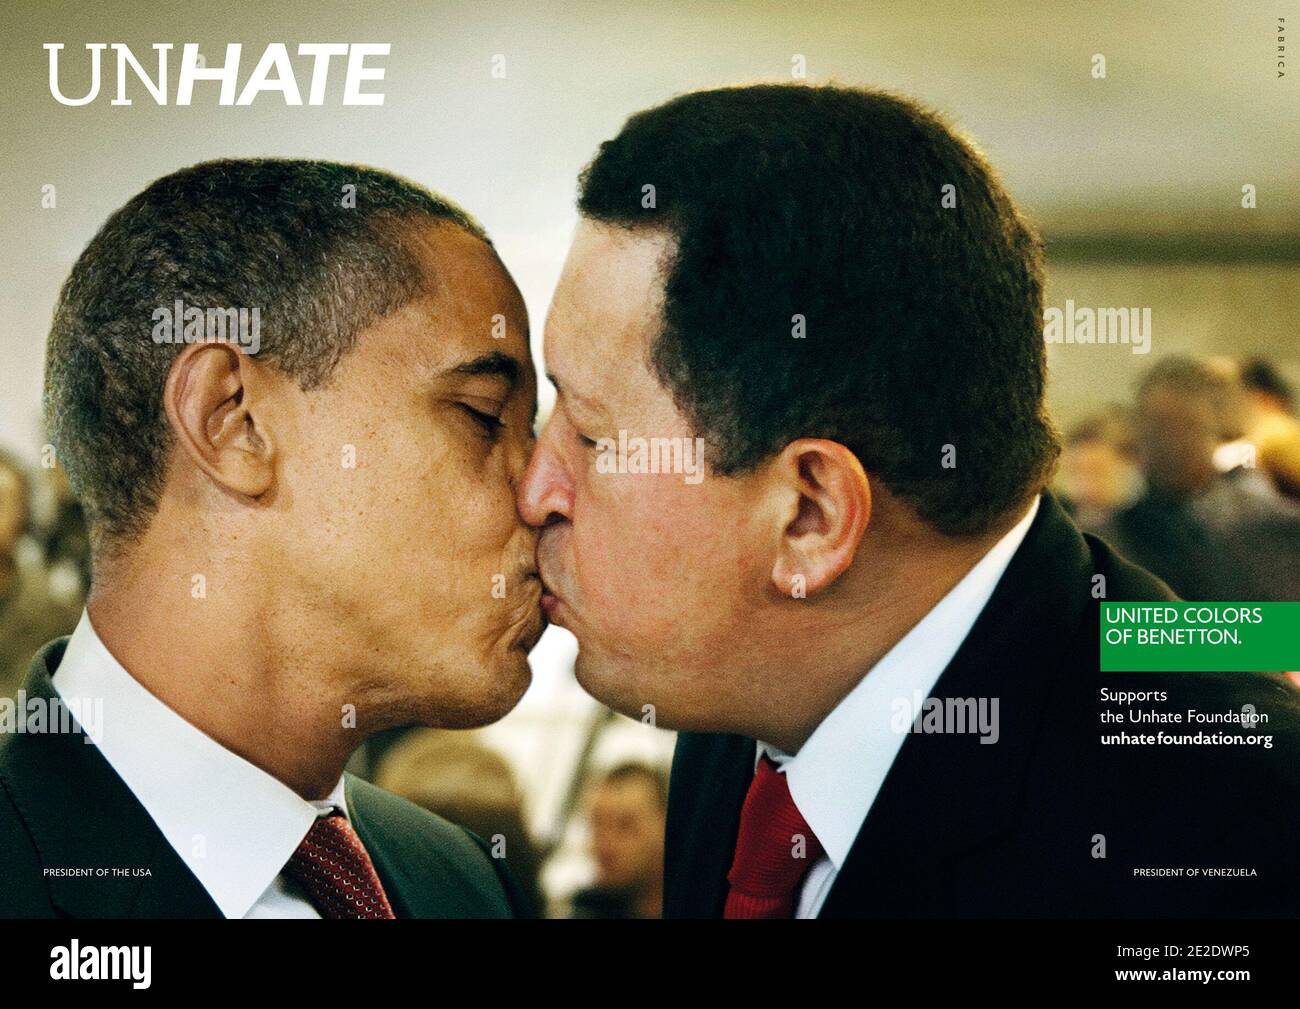 Images from United Colors of Benetton's Unhate campaign. The campaign  